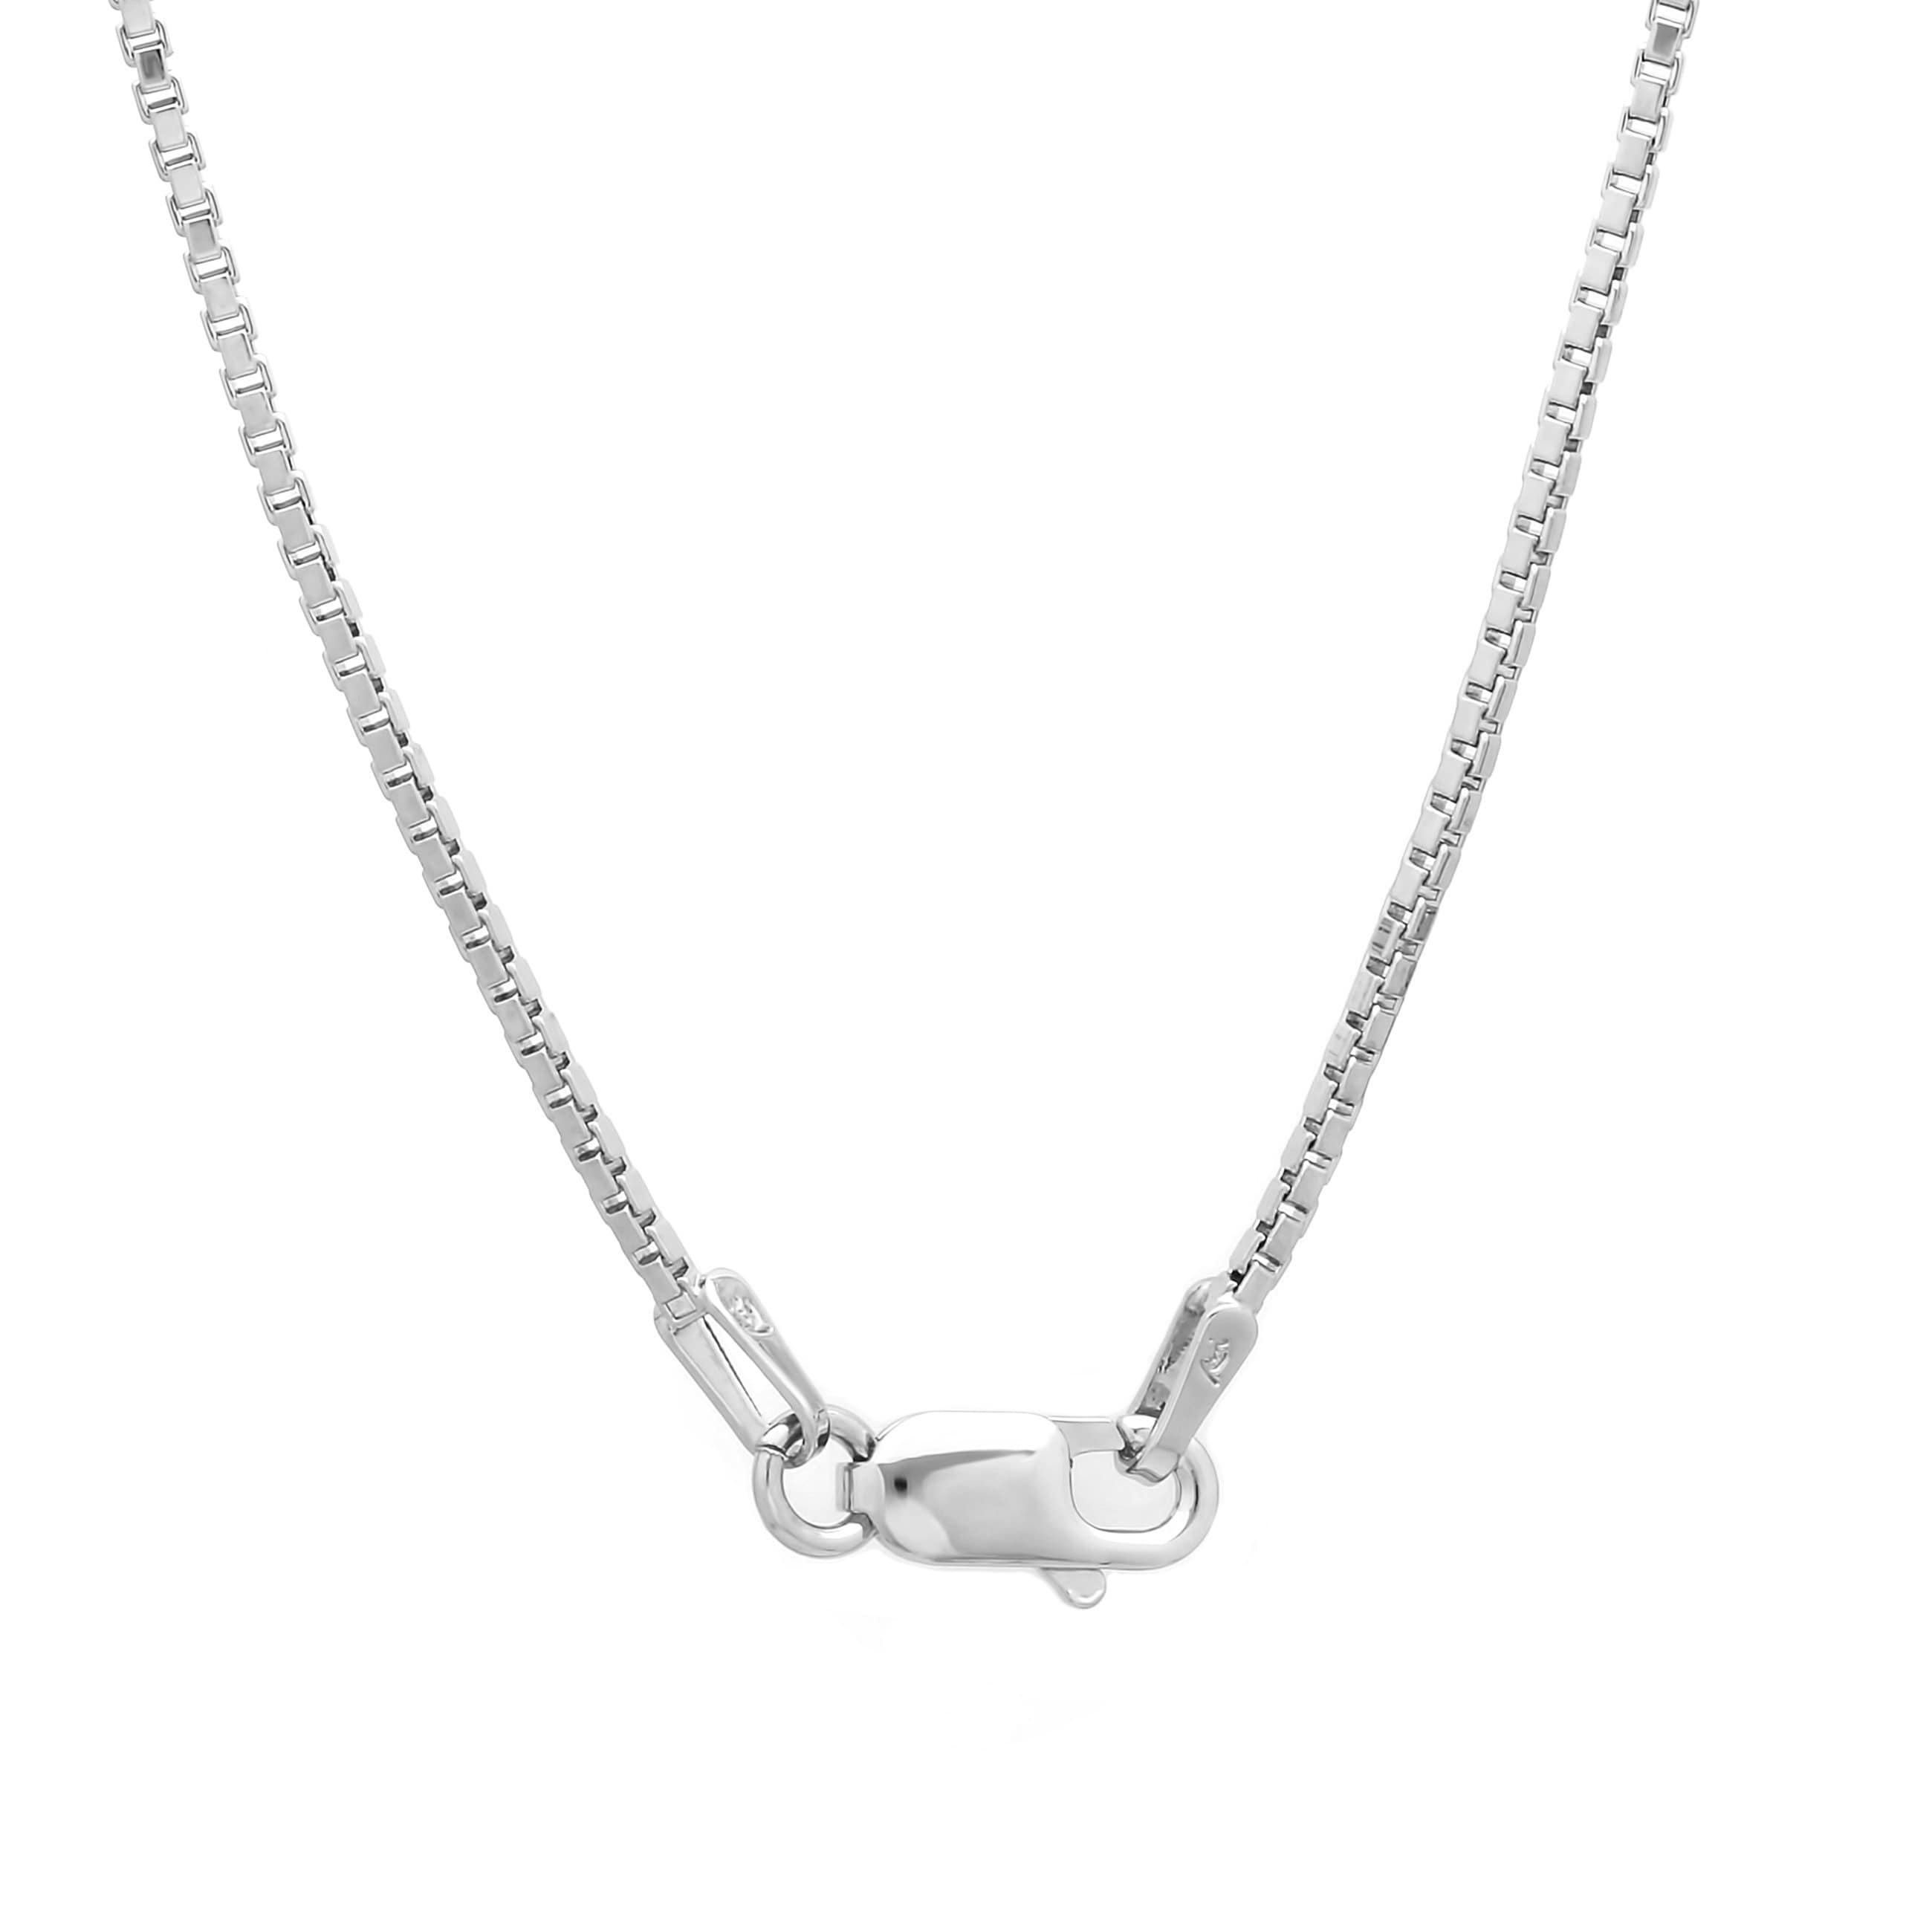 Lobster Claw Clasp Diamond Cut Box Chain 14 Sterling Silver 1mm Box Chain Necklace